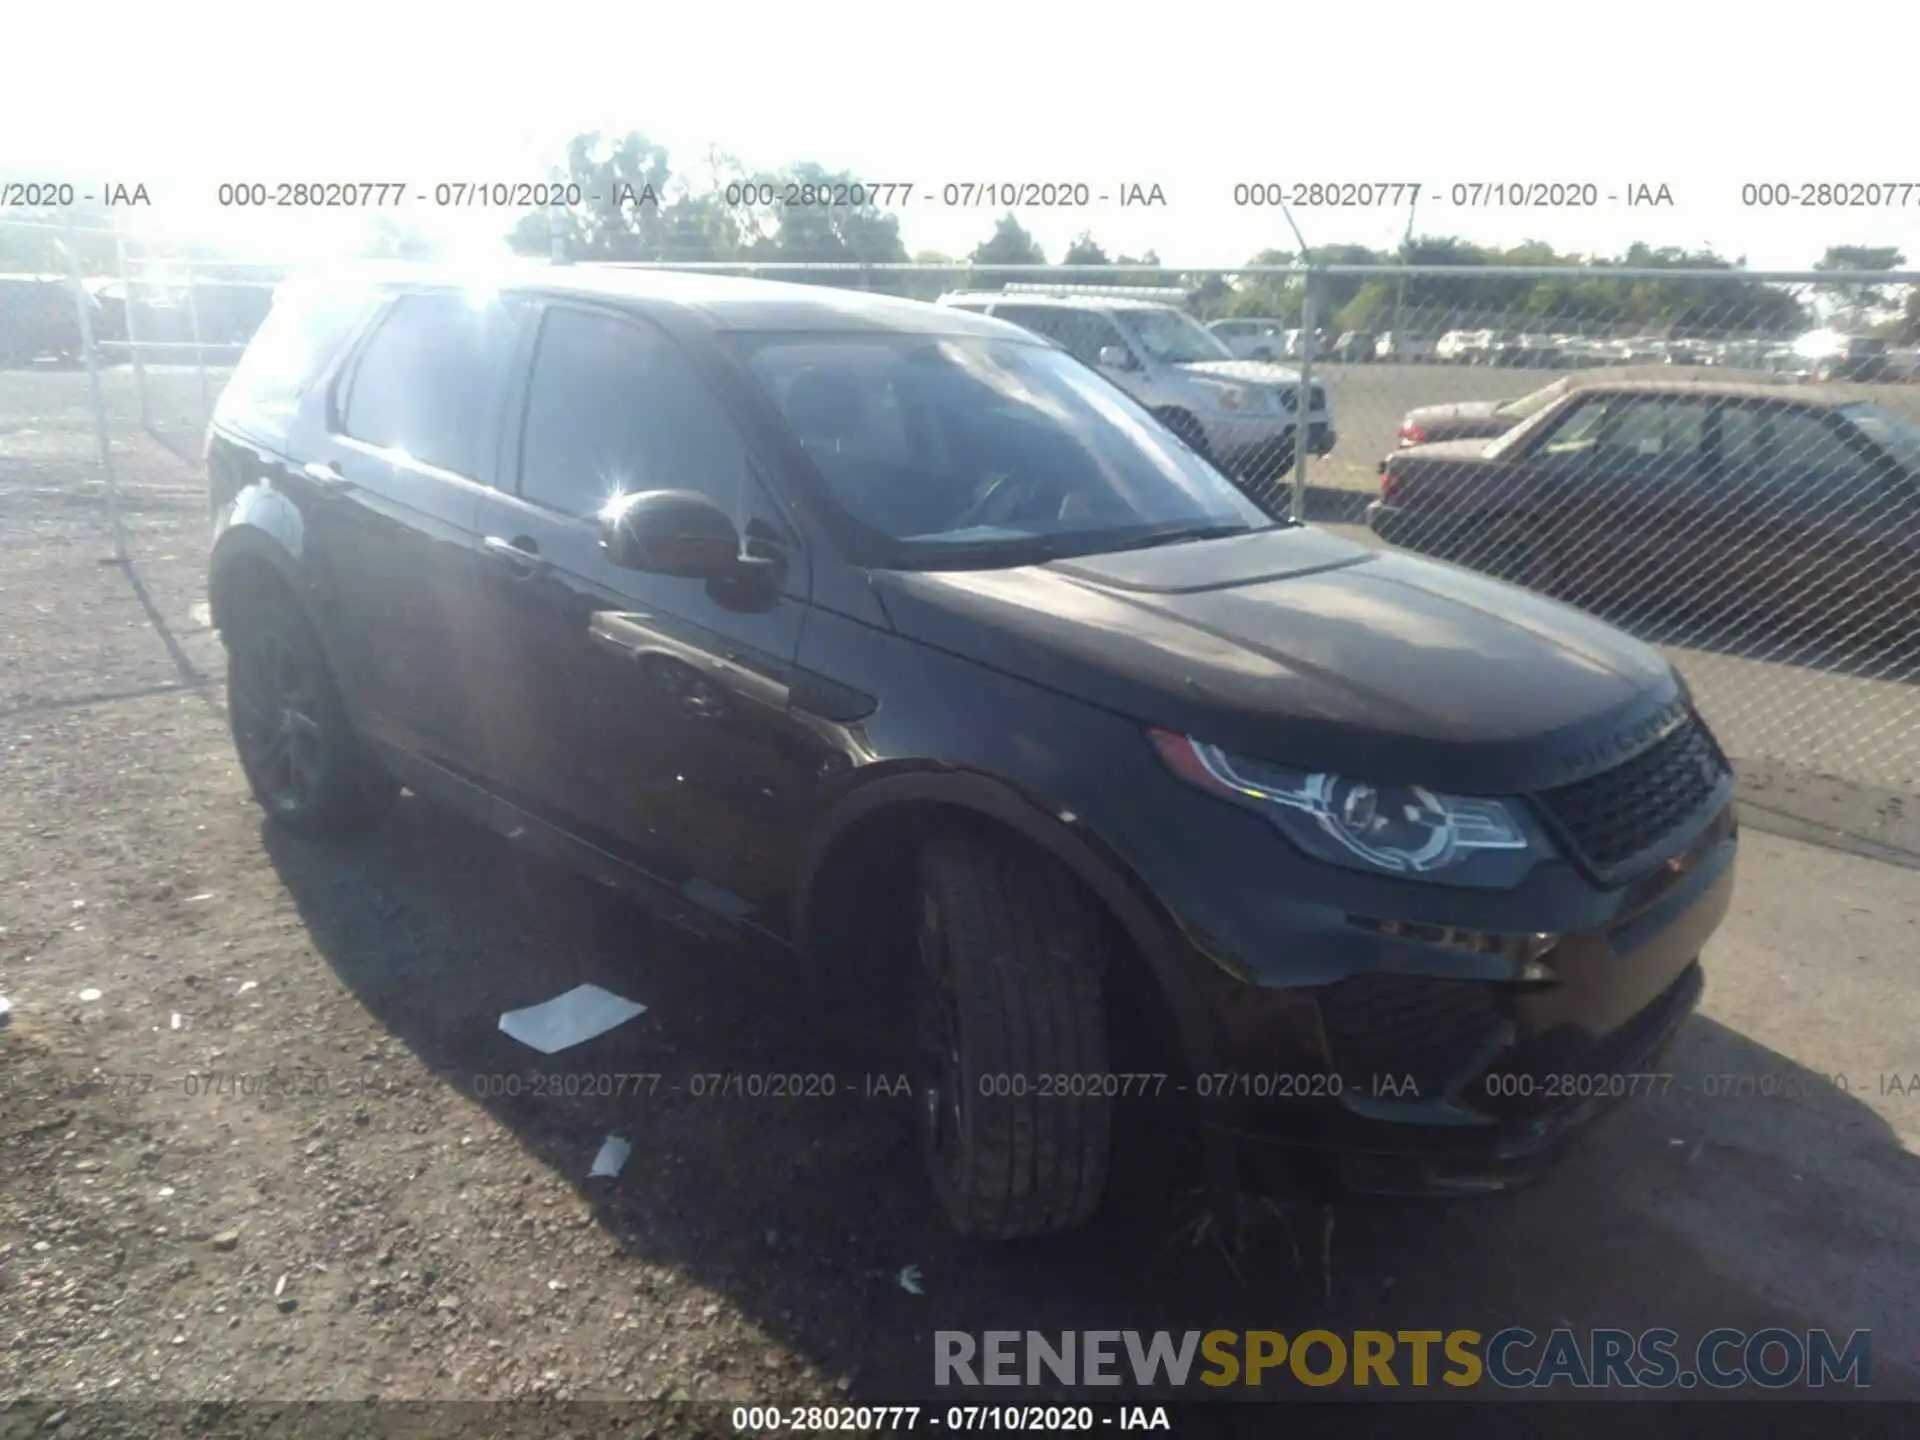 1 Photograph of a damaged car SALCR2GX7KH789617 LAND ROVER DISCOVERY SPORT 2019